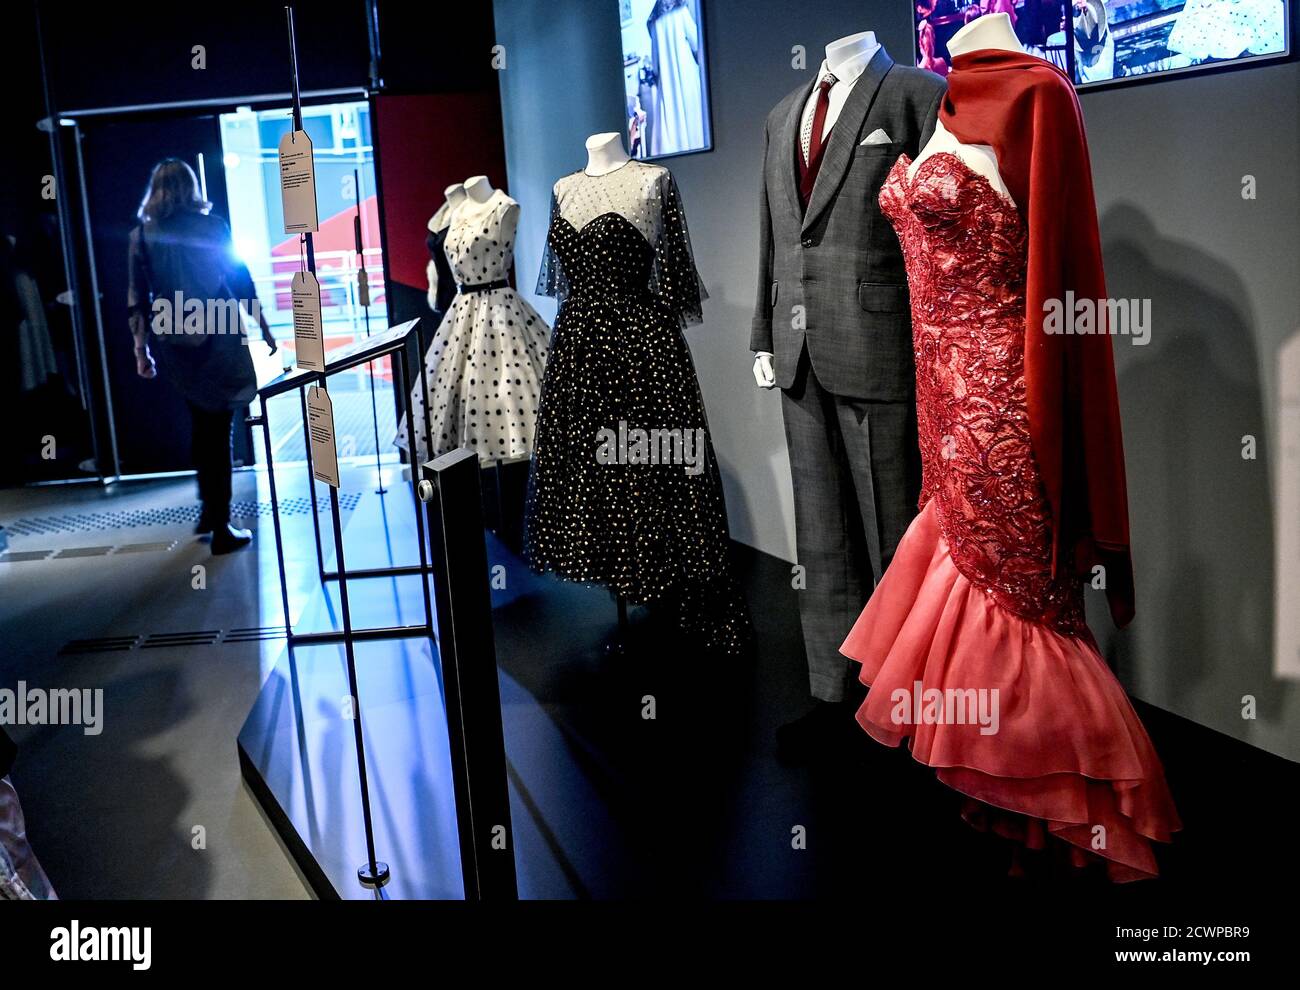 Berlin, Germany. 29th Sep, 2020. A visitor walks through the exhibition 'Hautnah. The Film Costumes of Barbara Baum' at the Deutsche Kinemathek - Museum für Film und Fernsehen. From 01.10. 2020 to 03.05.2021, more than 40 original film costumes from five decades of costume design will be shown. Credit: Britta Pedersen/dpa-Zentralbild/dpa - ATTENTION: Only for editorial use in connection with current reporting and only with full mention of the above credit/dpa/Alamy Live News Stock Photo